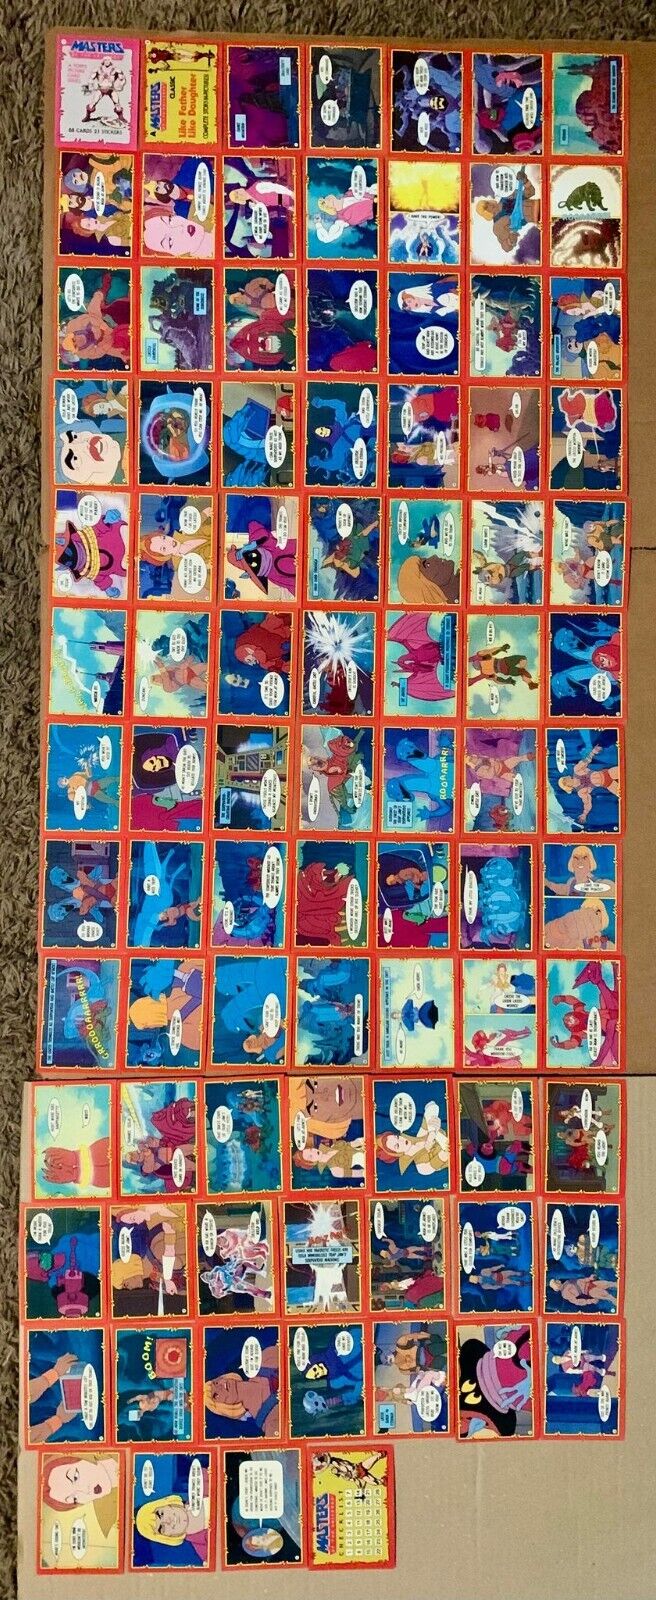 Topps 1984 He-Man & The Masters of the Universe Complete Card Set 1-88